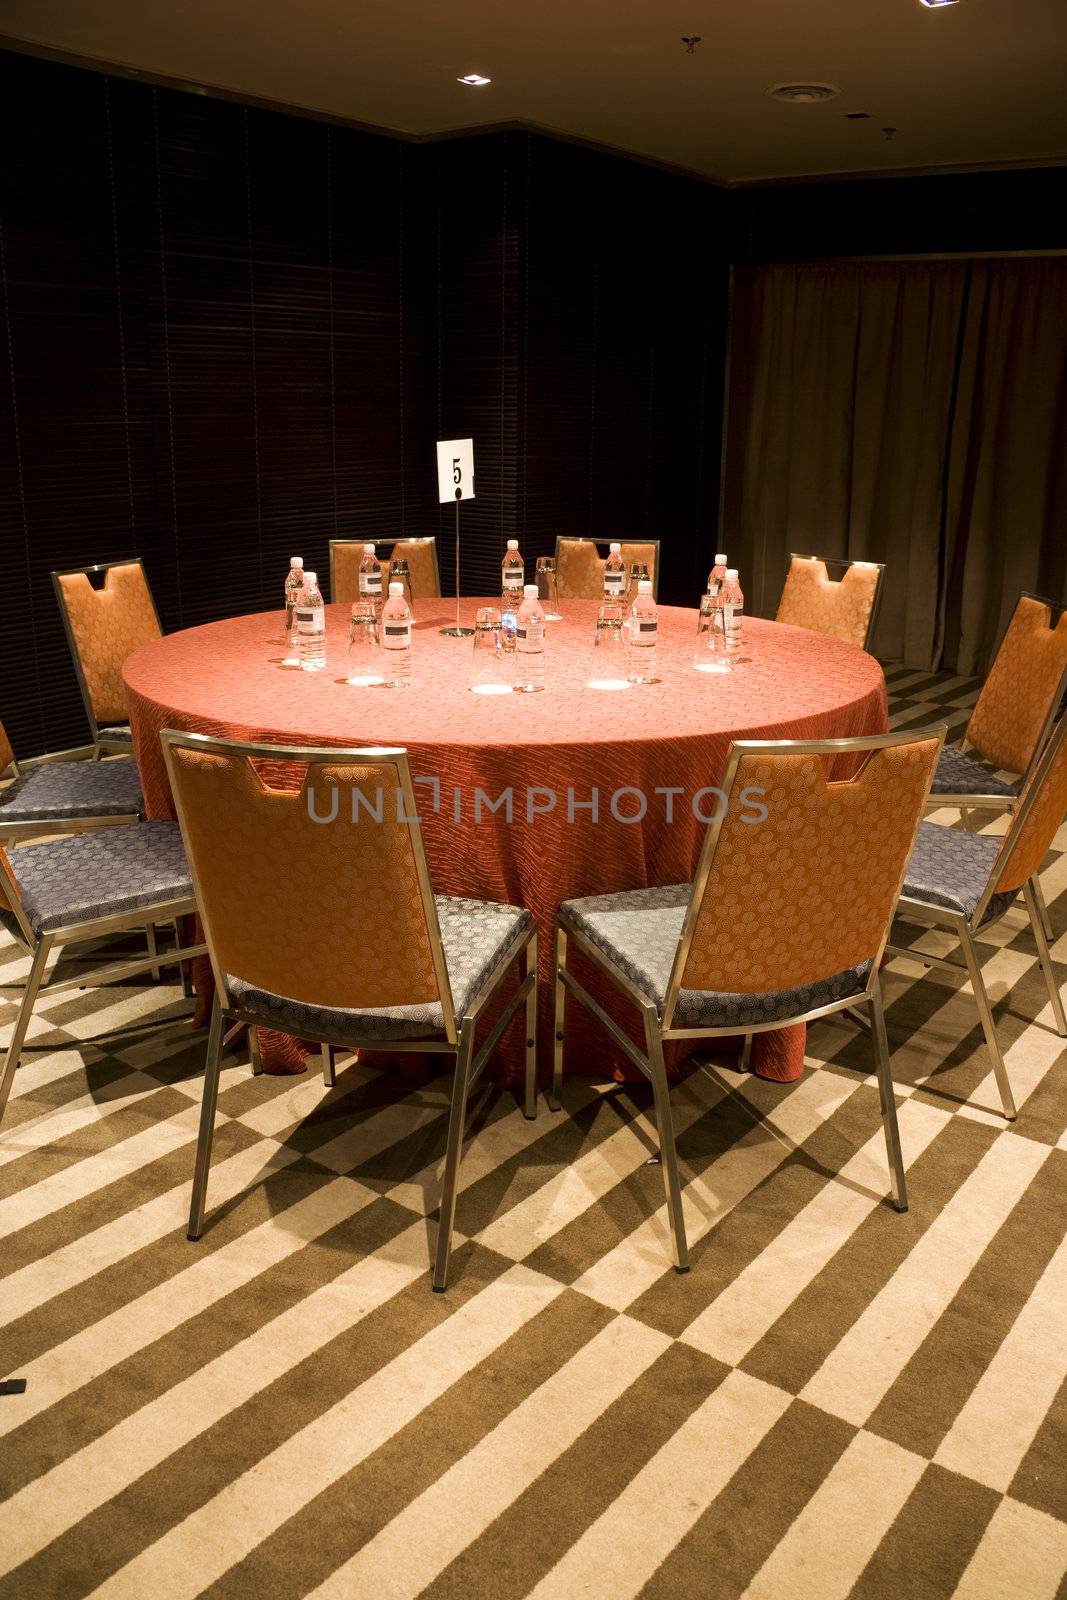 Image of a meeting table.
